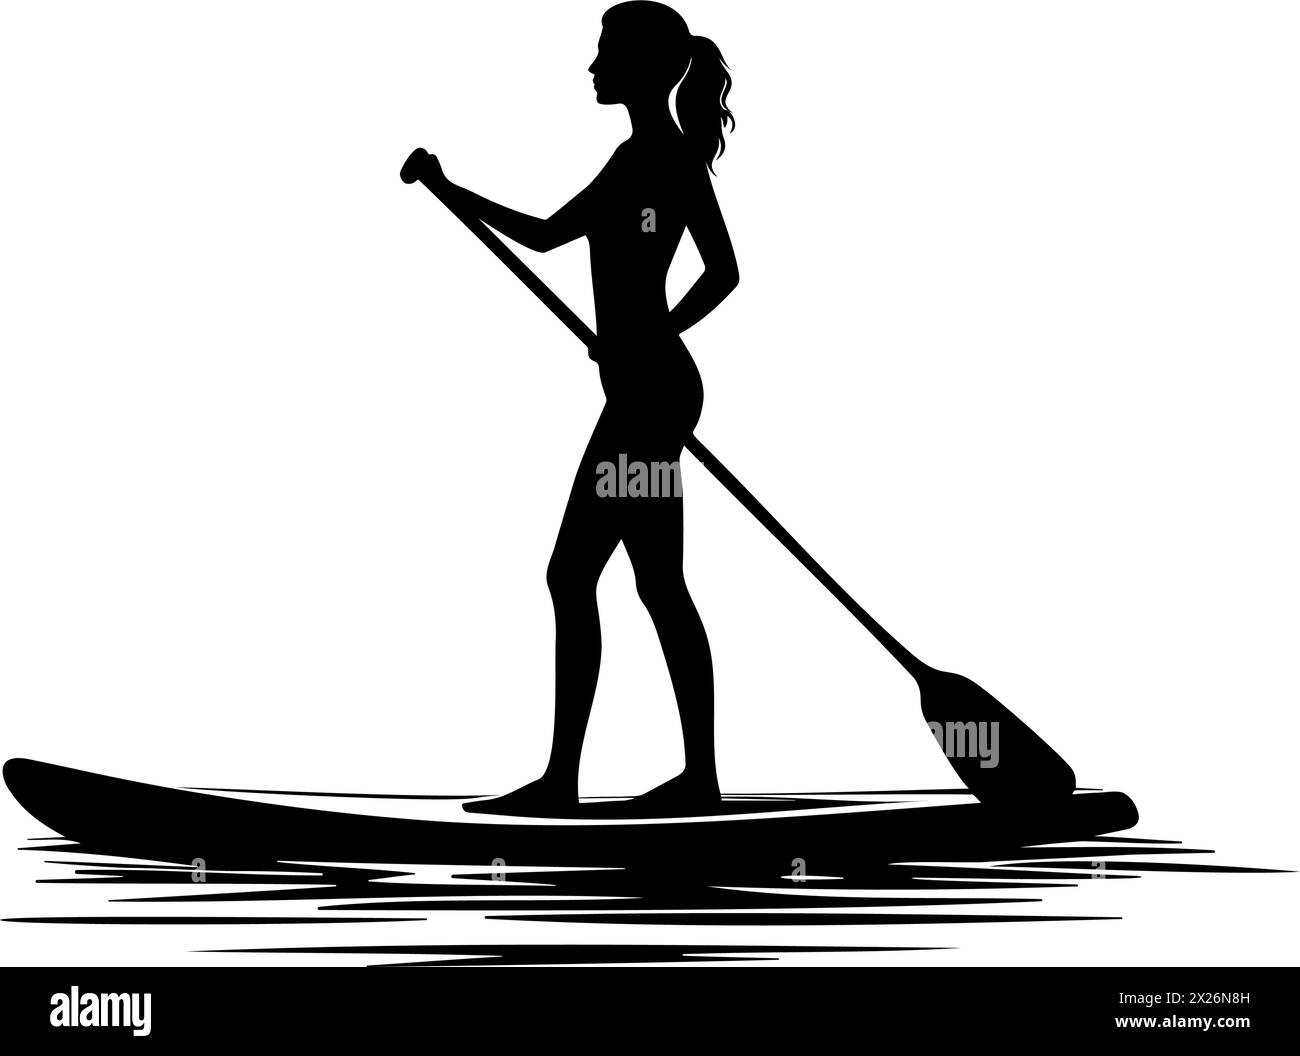 Woman Paddle boarder silhouette. Vector illustration Stock Vector